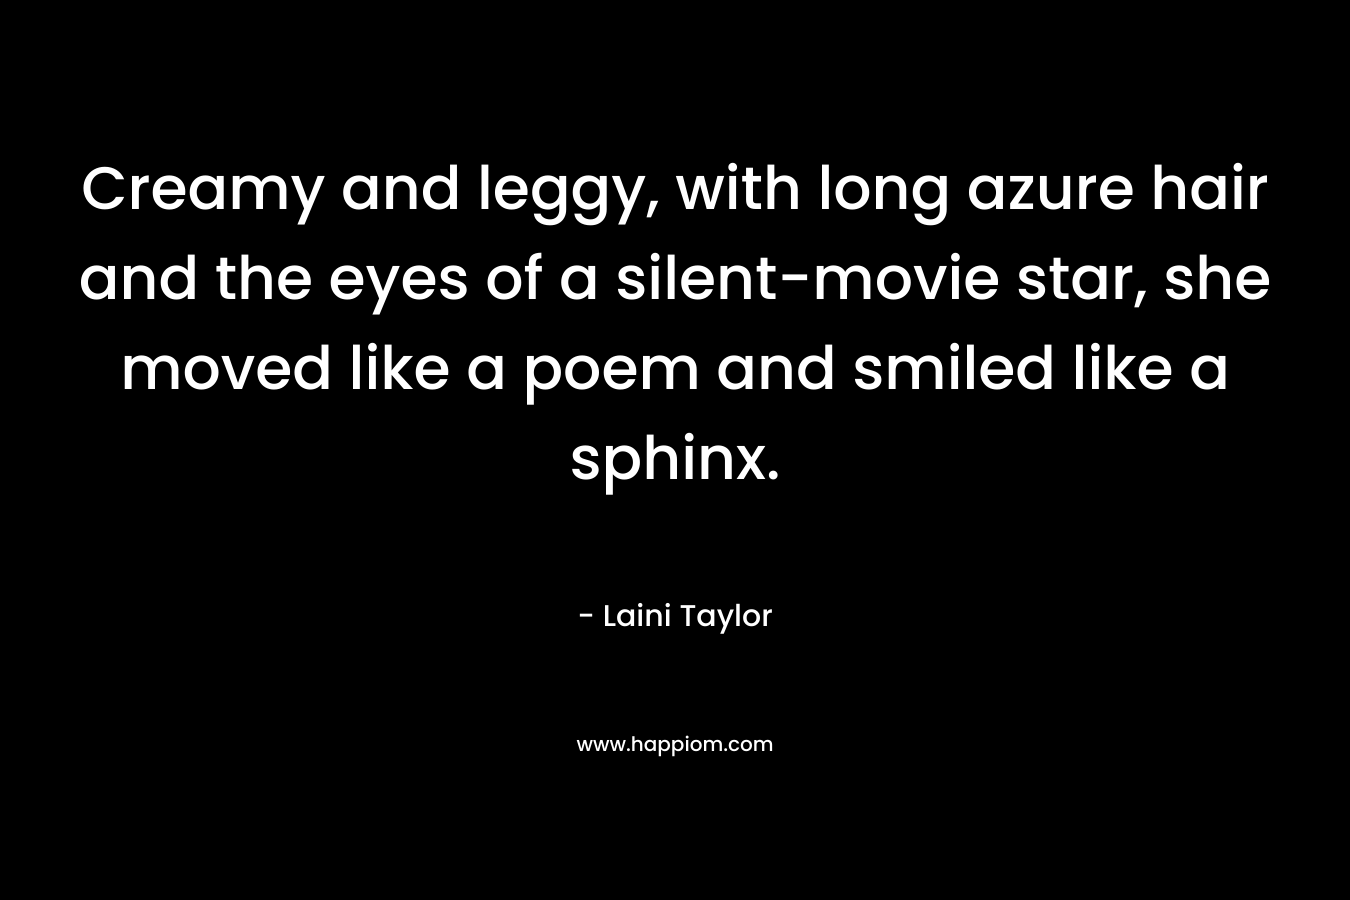 Creamy and leggy, with long azure hair and the eyes of a silent-movie star, she moved like a poem and smiled like a sphinx. – Laini Taylor